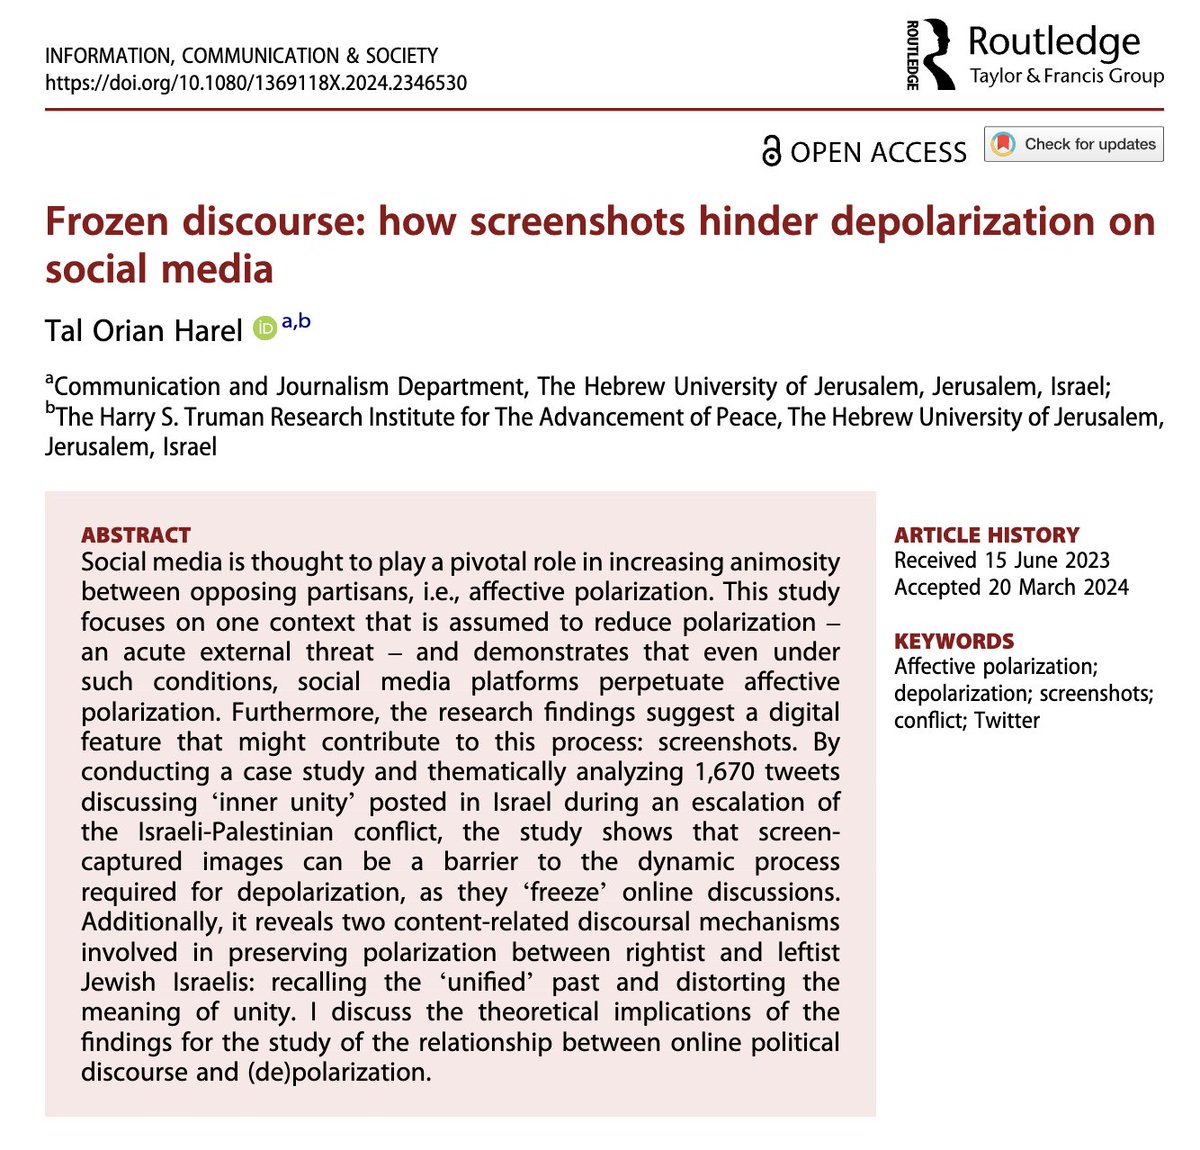 Thrilled to share that my first single-authored paper, 'Frozen Discourse', is now available online @icsjournal! I explore how screenshots on social media hinder efforts to bridge political divides. Check out the findings here (it's open access): tandfonline.com/doi/full/10.10…